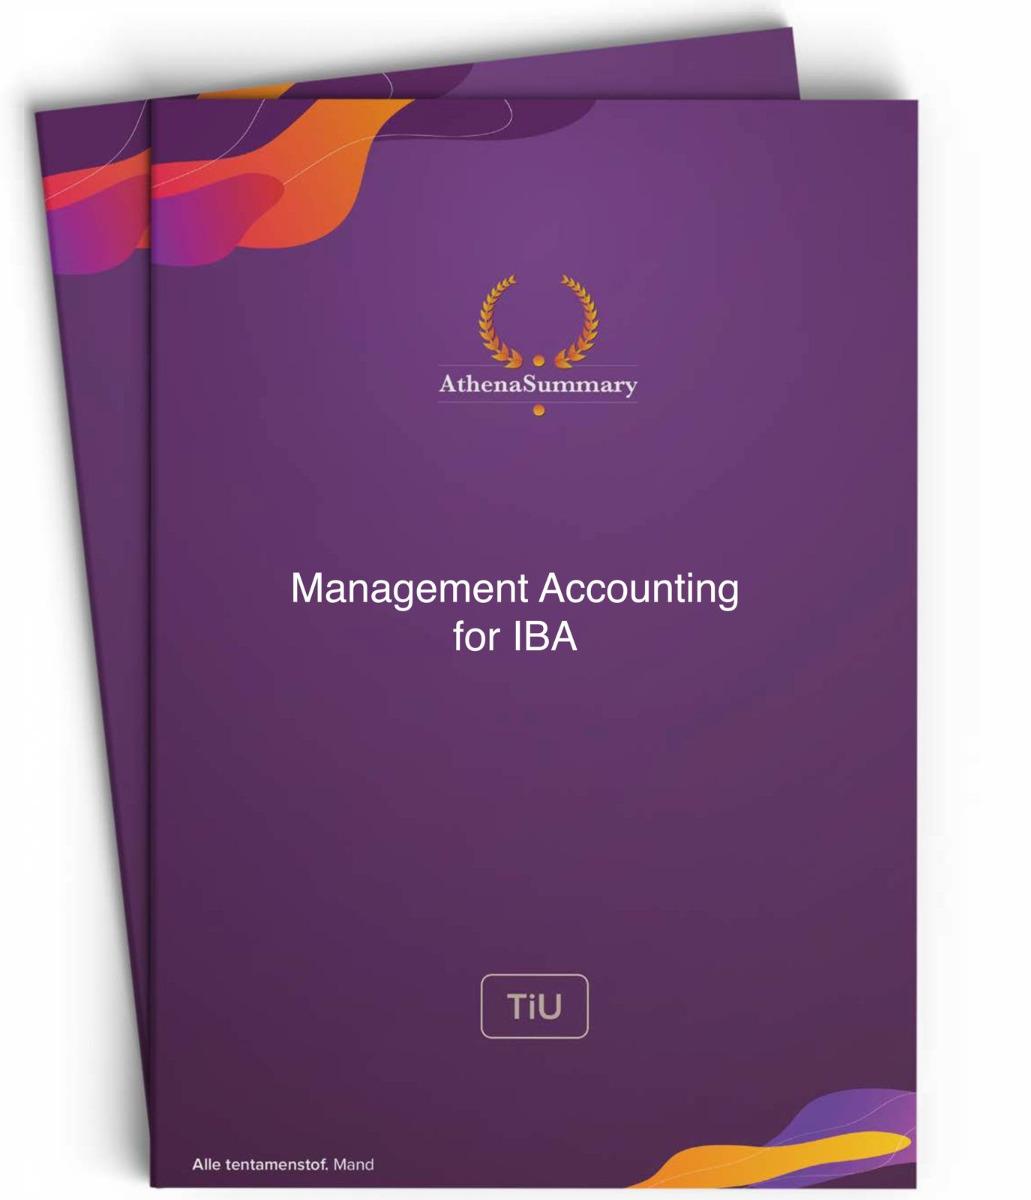 Literature and Lecture Summary: Management Accounting for IBA